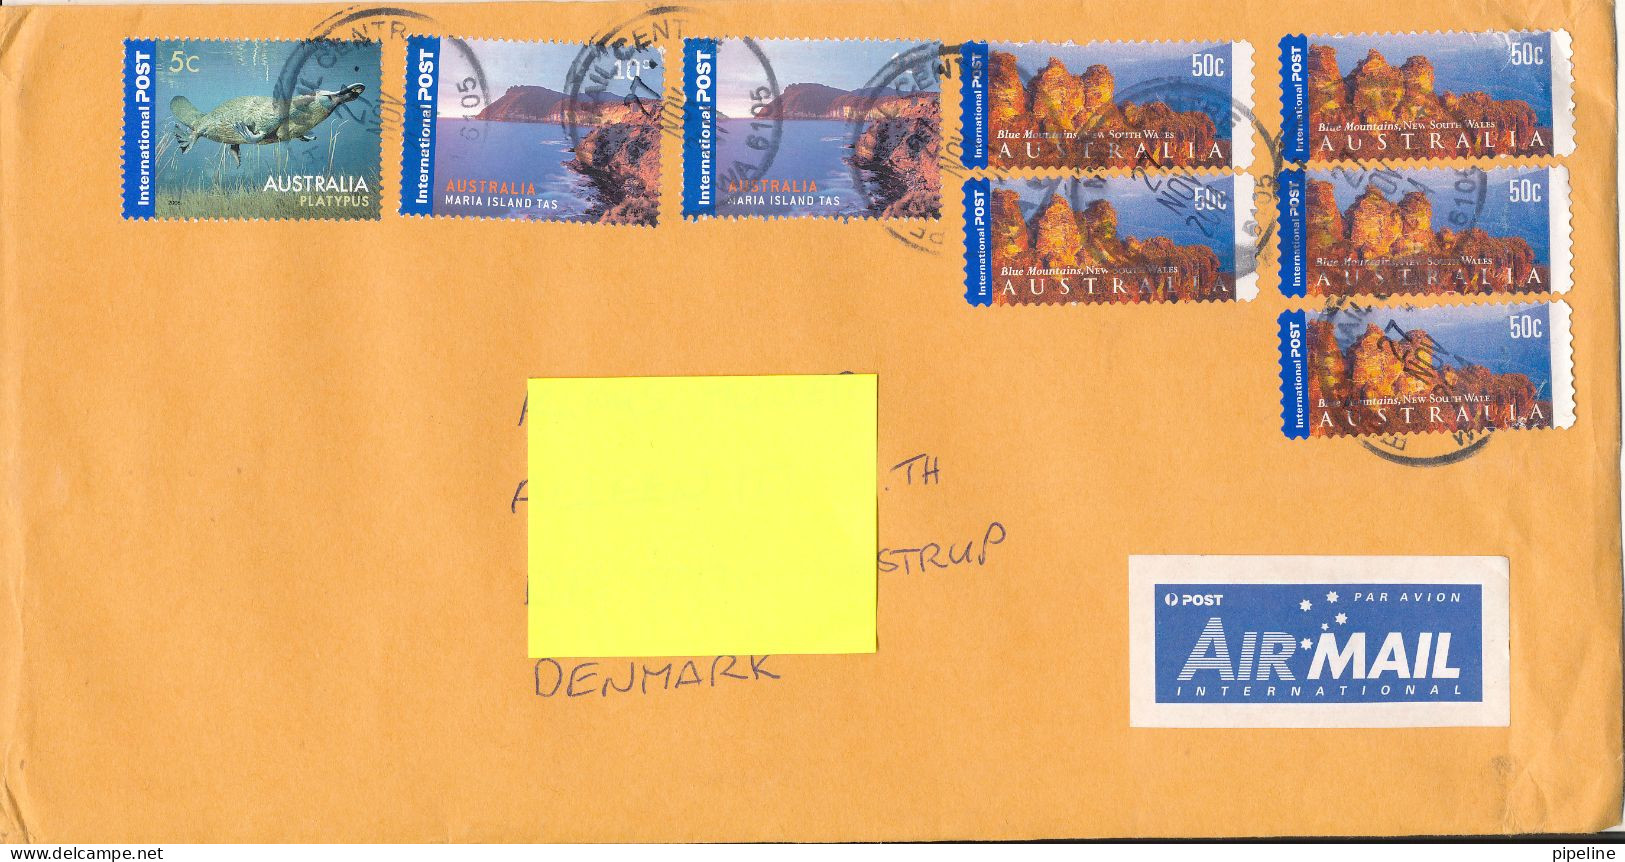 Australia Cover Sent Air Mail To Denmark 27-11-2014 With More Topic Stamps - Covers & Documents